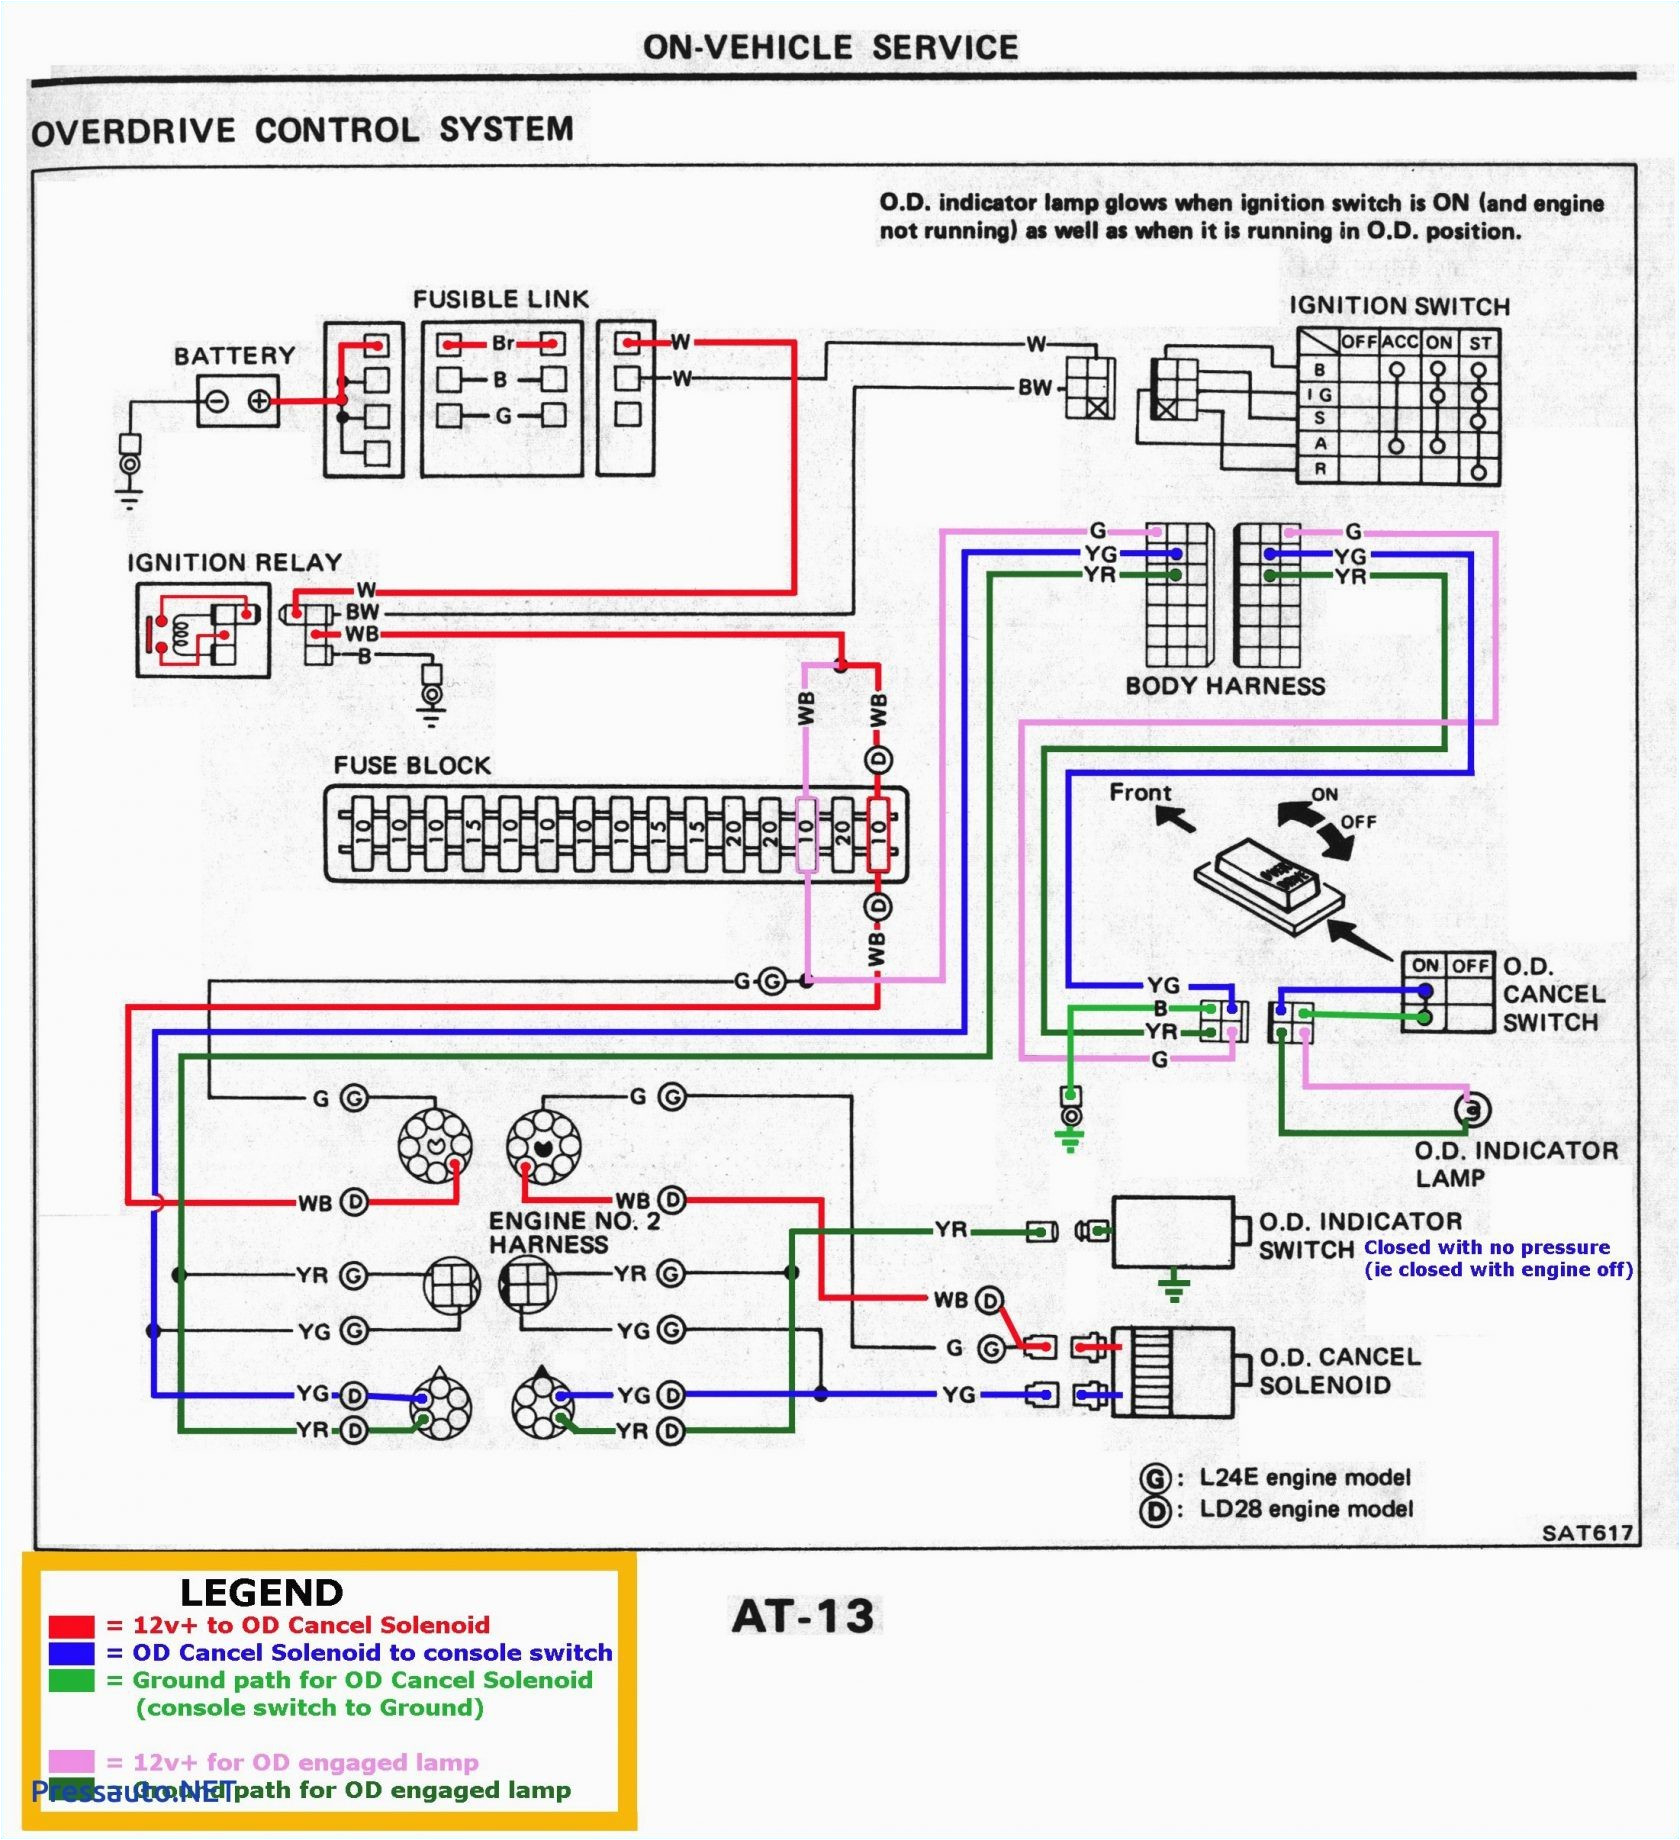 solid signal wiring diagrams wiring diagram home solid signal wiring diagrams